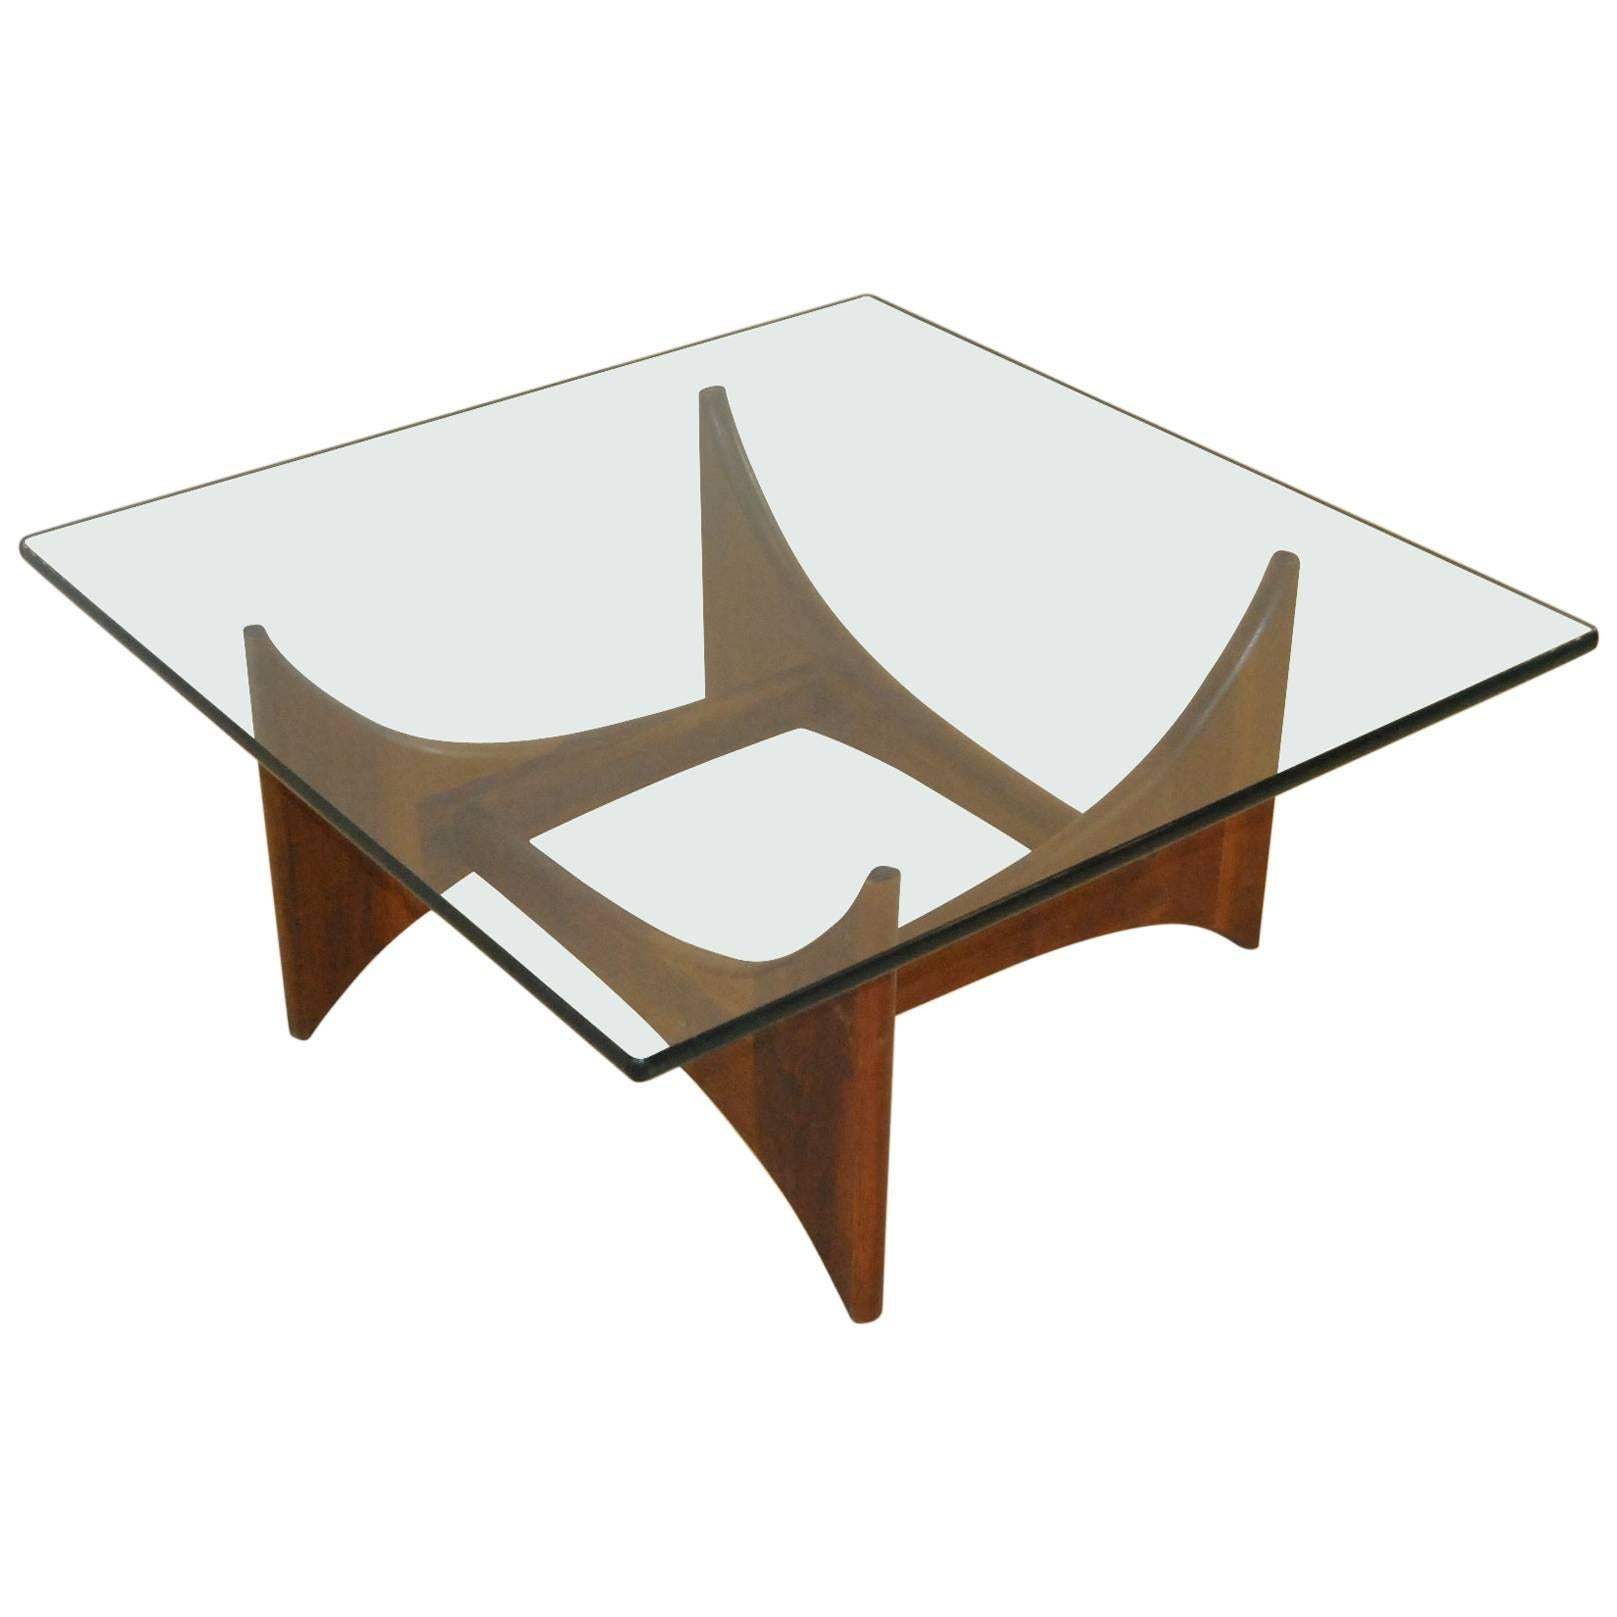 Square Mid-Century Modern Walnut and Glass Coffee Table by Adrian Pearsall